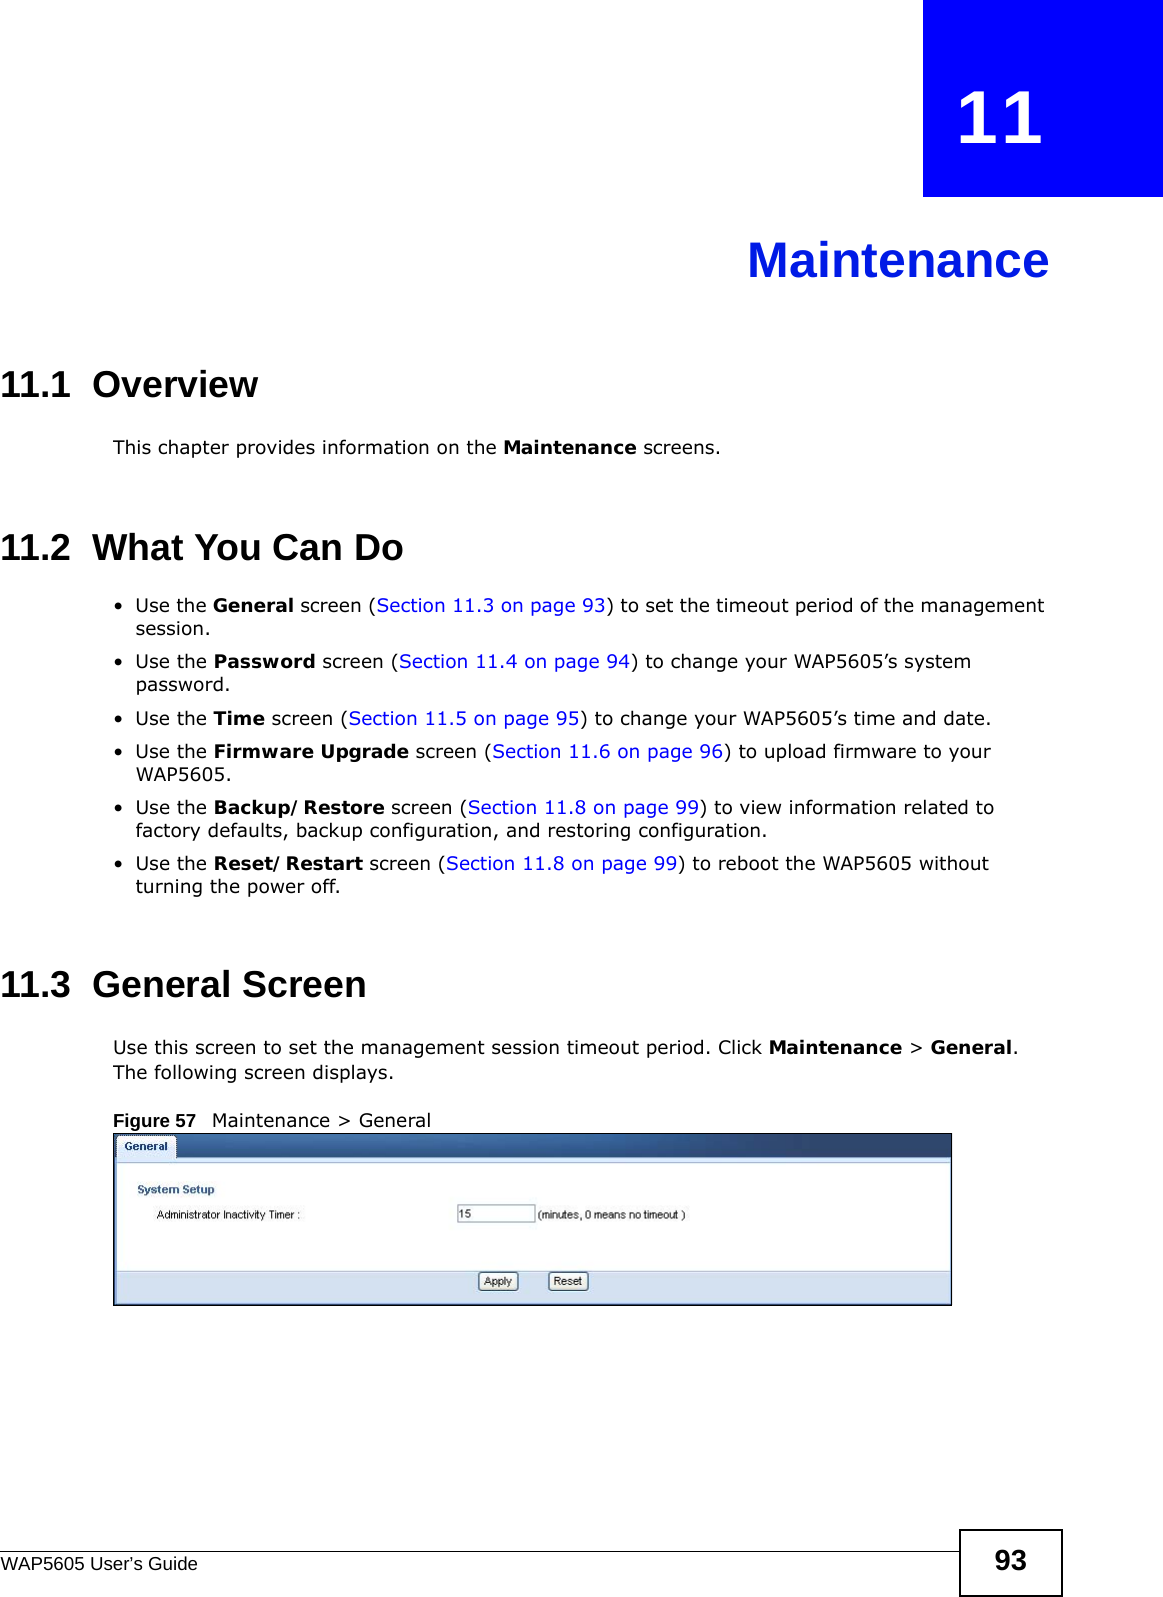 WAP5605 User’s Guide 93CHAPTER   11Maintenance11.1  OverviewThis chapter provides information on the Maintenance screens. 11.2  What You Can Do•Use the General screen (Section 11.3 on page 93) to set the timeout period of the management session. •Use the Password screen (Section 11.4 on page 94) to change your WAP5605’s system password.•Use the Time screen (Section 11.5 on page 95) to change your WAP5605’s time and date.•Use the Firmware Upgrade screen (Section 11.6 on page 96) to upload firmware to your WAP5605.•Use the Backup/Restore screen (Section 11.8 on page 99) to view information related to factory defaults, backup configuration, and restoring configuration.•Use the Reset/Restart screen (Section 11.8 on page 99) to reboot the WAP5605 without turning the power off.11.3  General Screen    Use this screen to set the management session timeout period. Click Maintenance &gt; General. The following screen displays.Figure 57   Maintenance &gt; General 